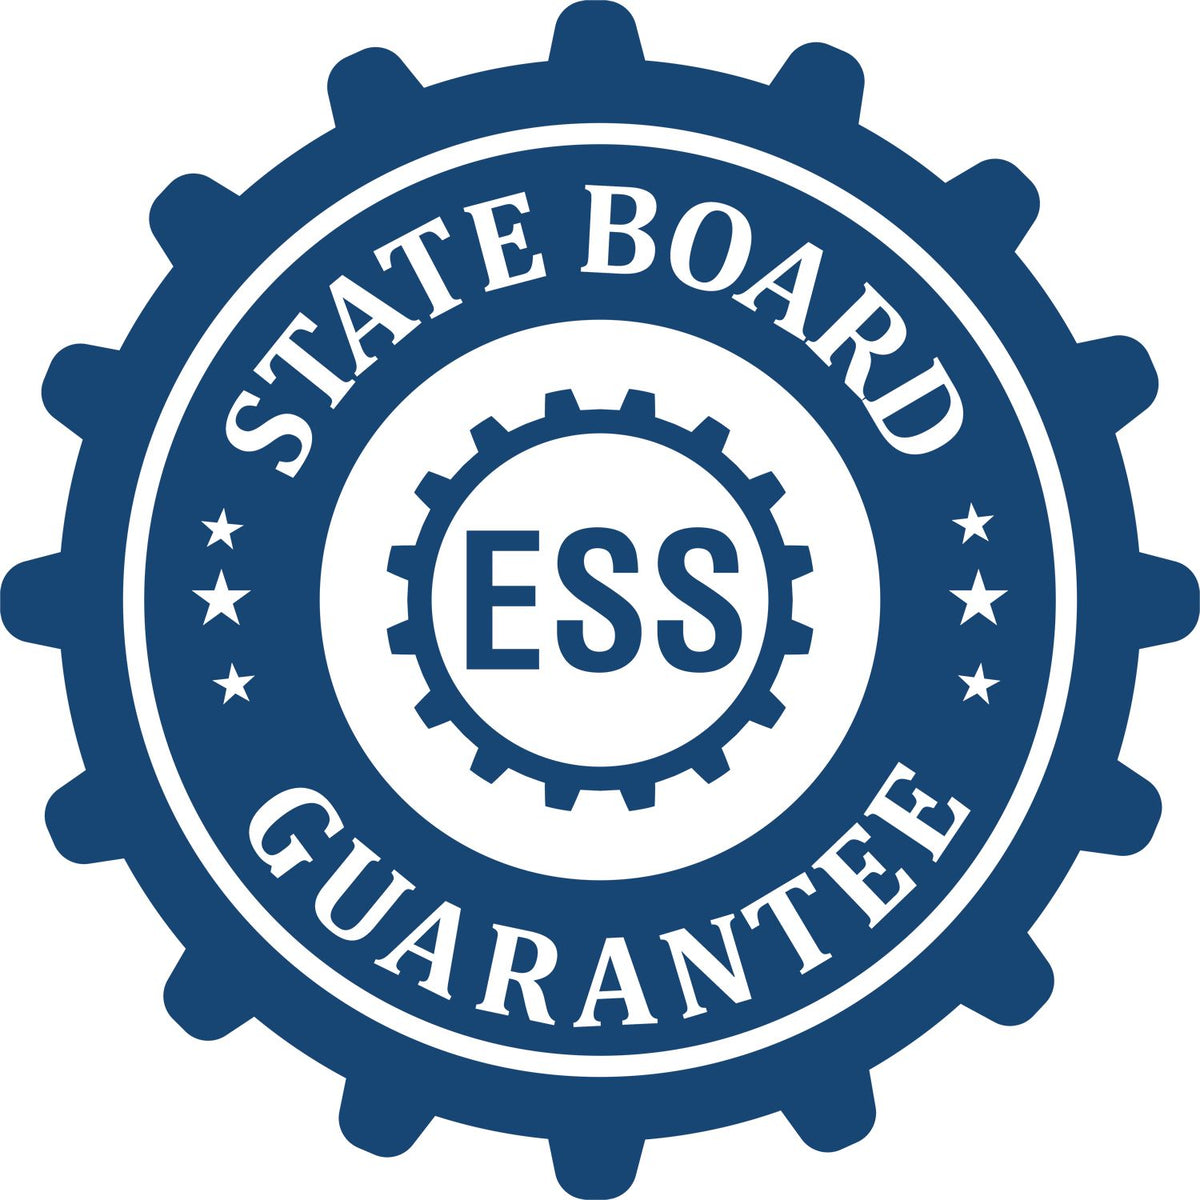 An emblem in a gear shape illustrating a state board guarantee for the Soft Idaho Professional Engineer Seal product.